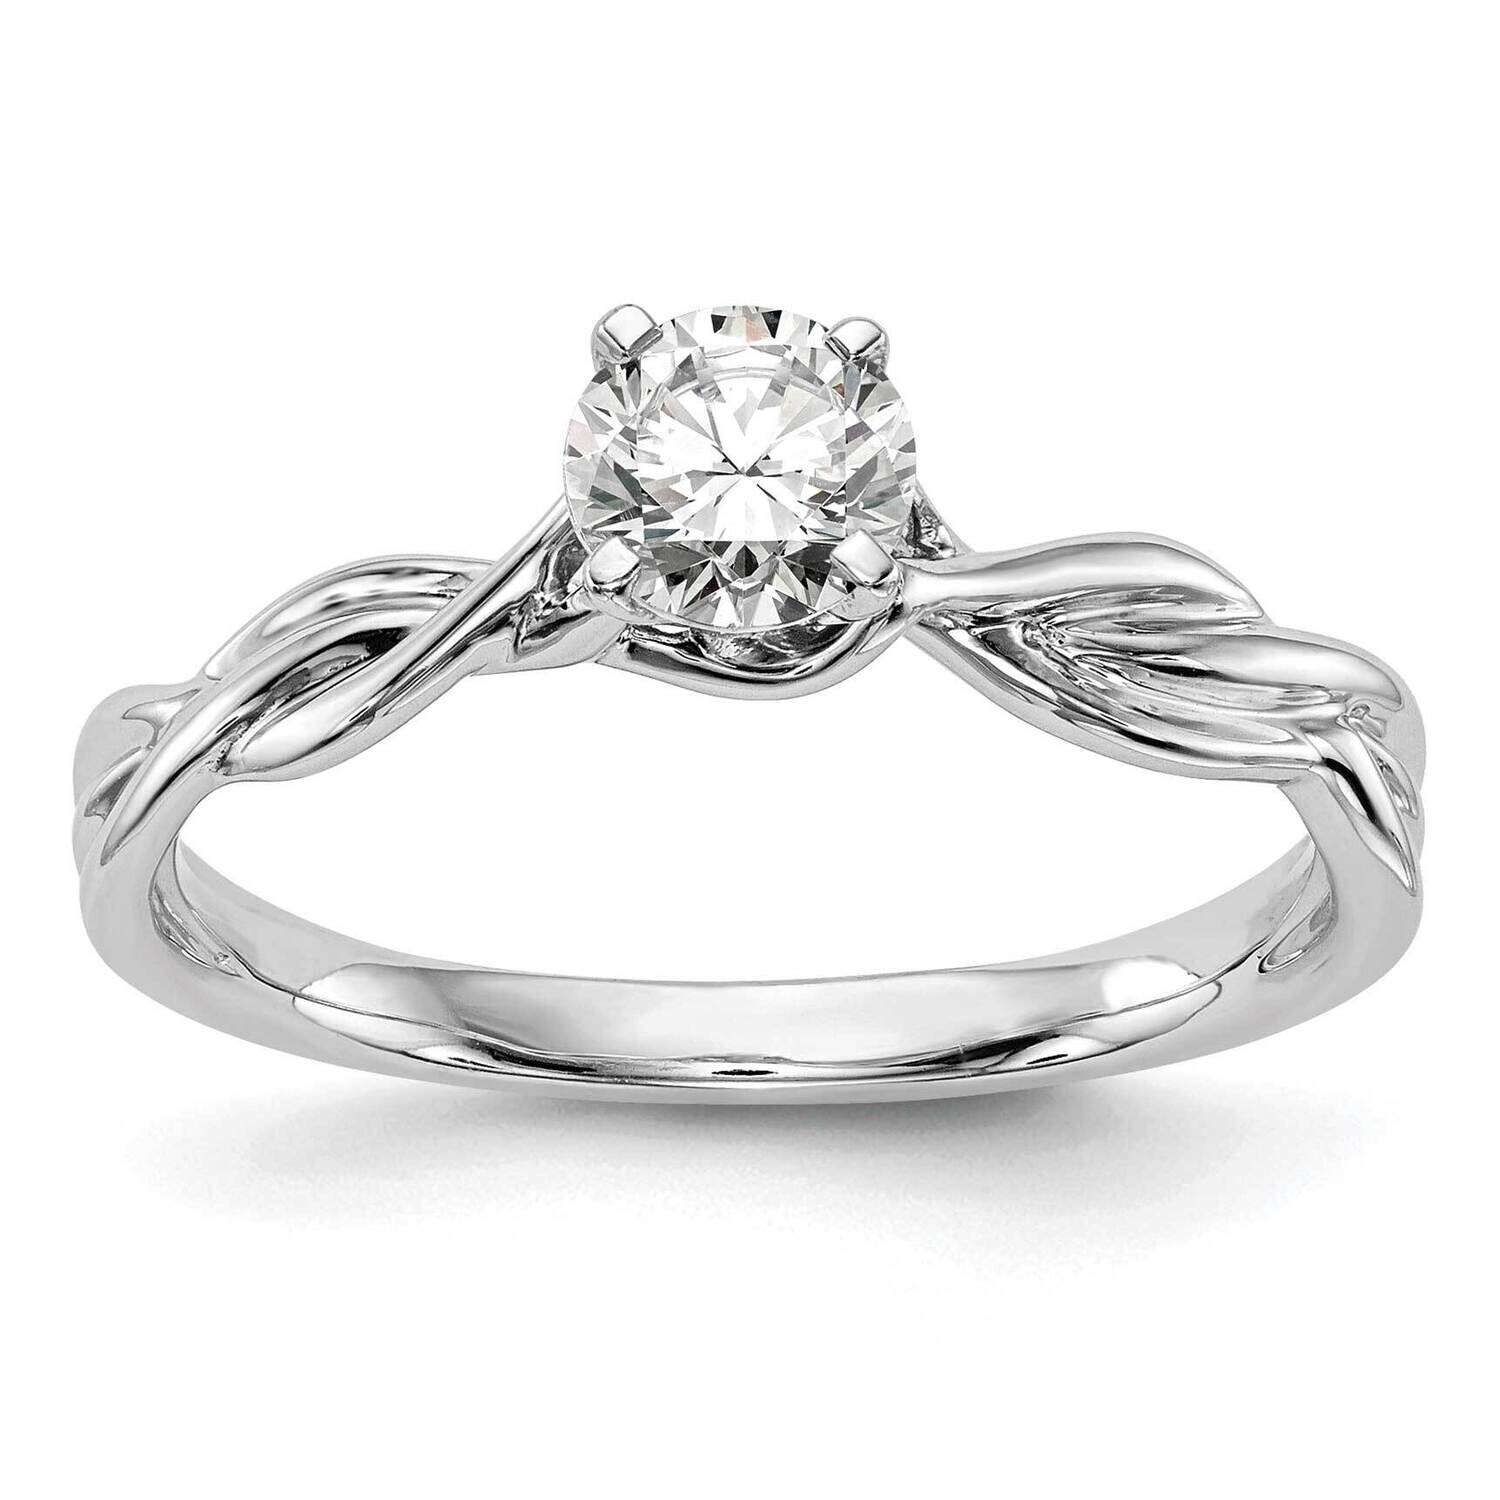 Peg Set Twist Solitaire Engagement Ring Mounting 14k White Gold RM1997E-CWAA